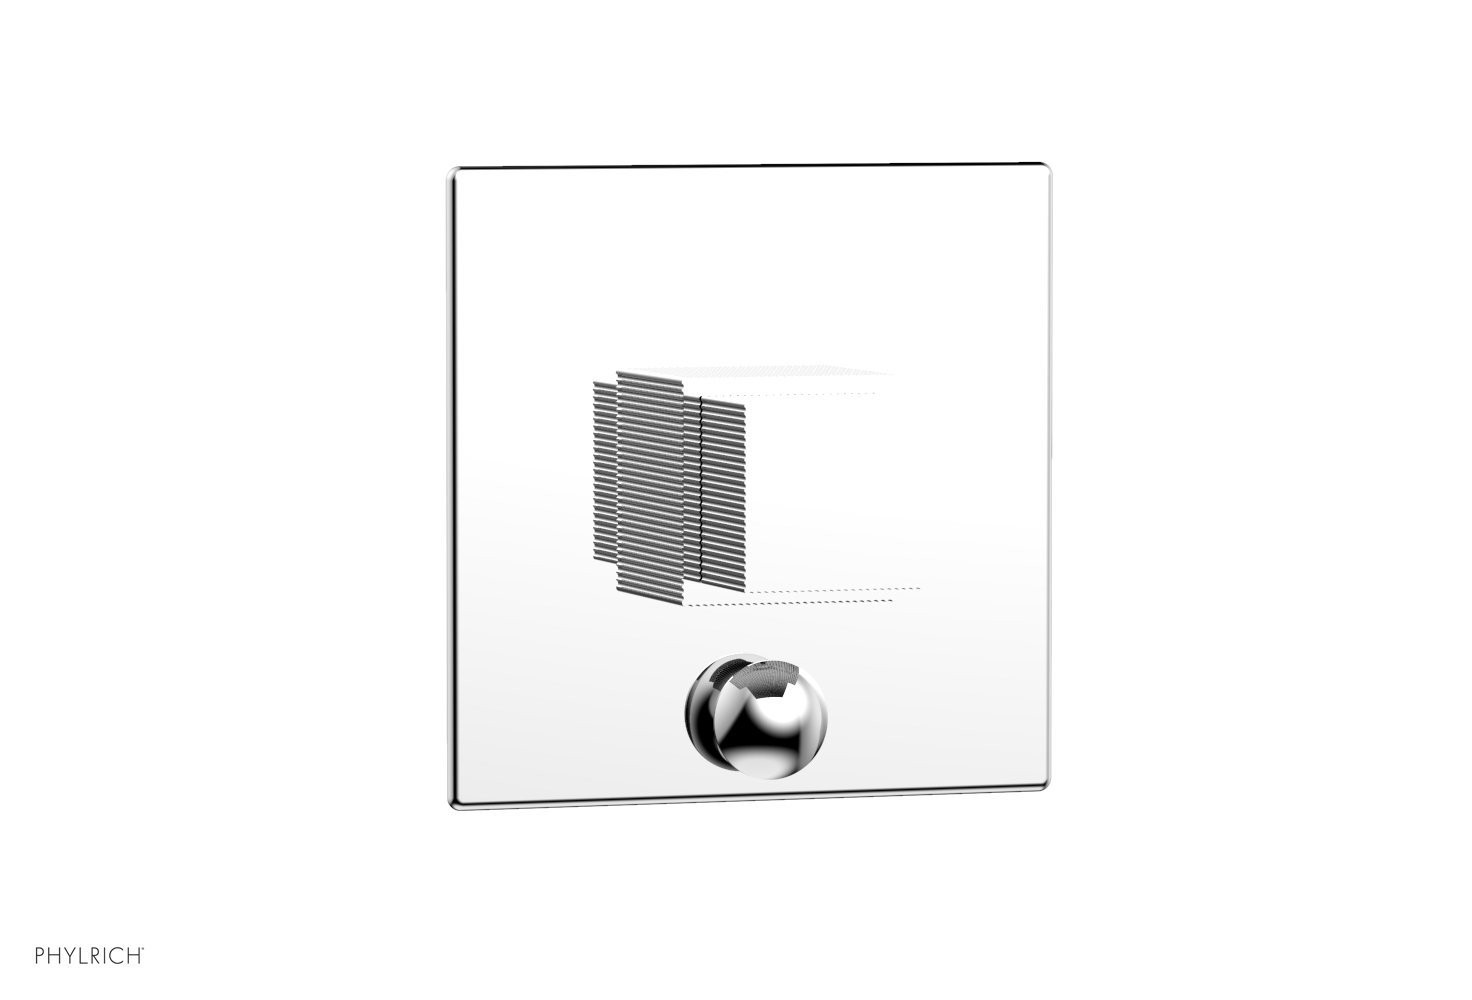 PHYLRICH 4-121 STRIA WALL MOUNT PRESSURE BALANCE SHOWER PLATE WITH DIVERTER AND CUBE HANDLE TRIM